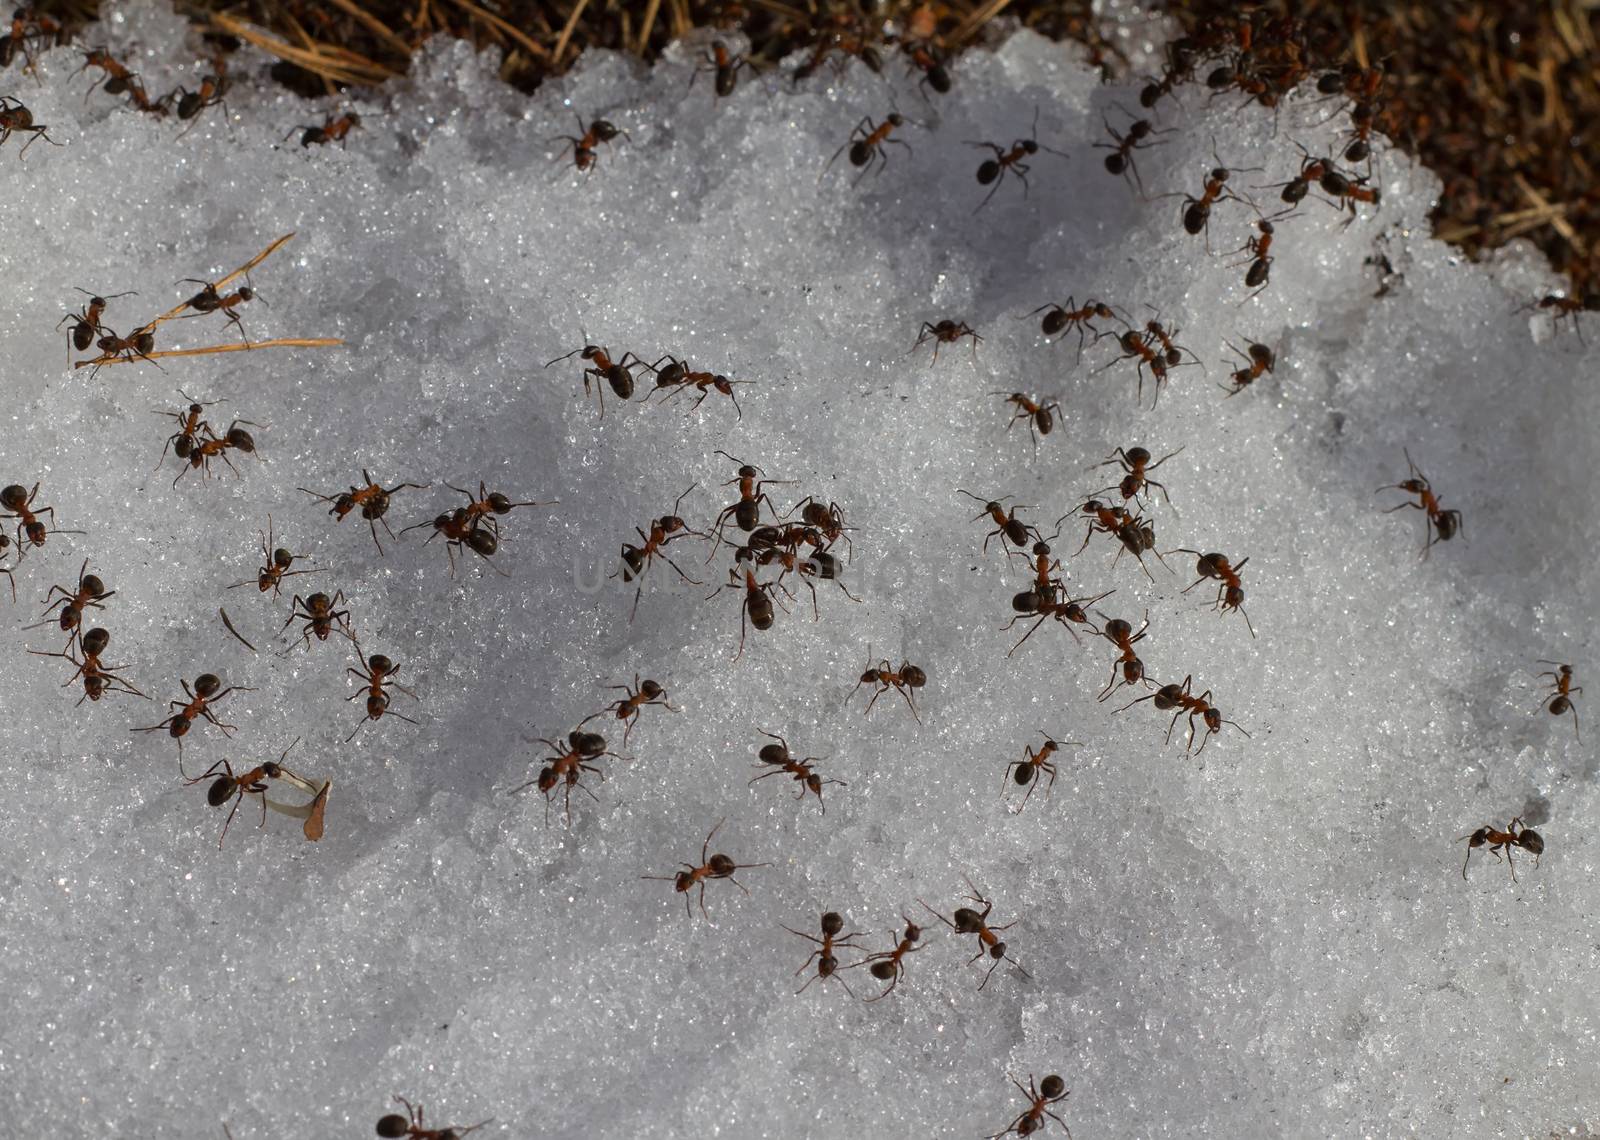 early spring ants in snow by max51288